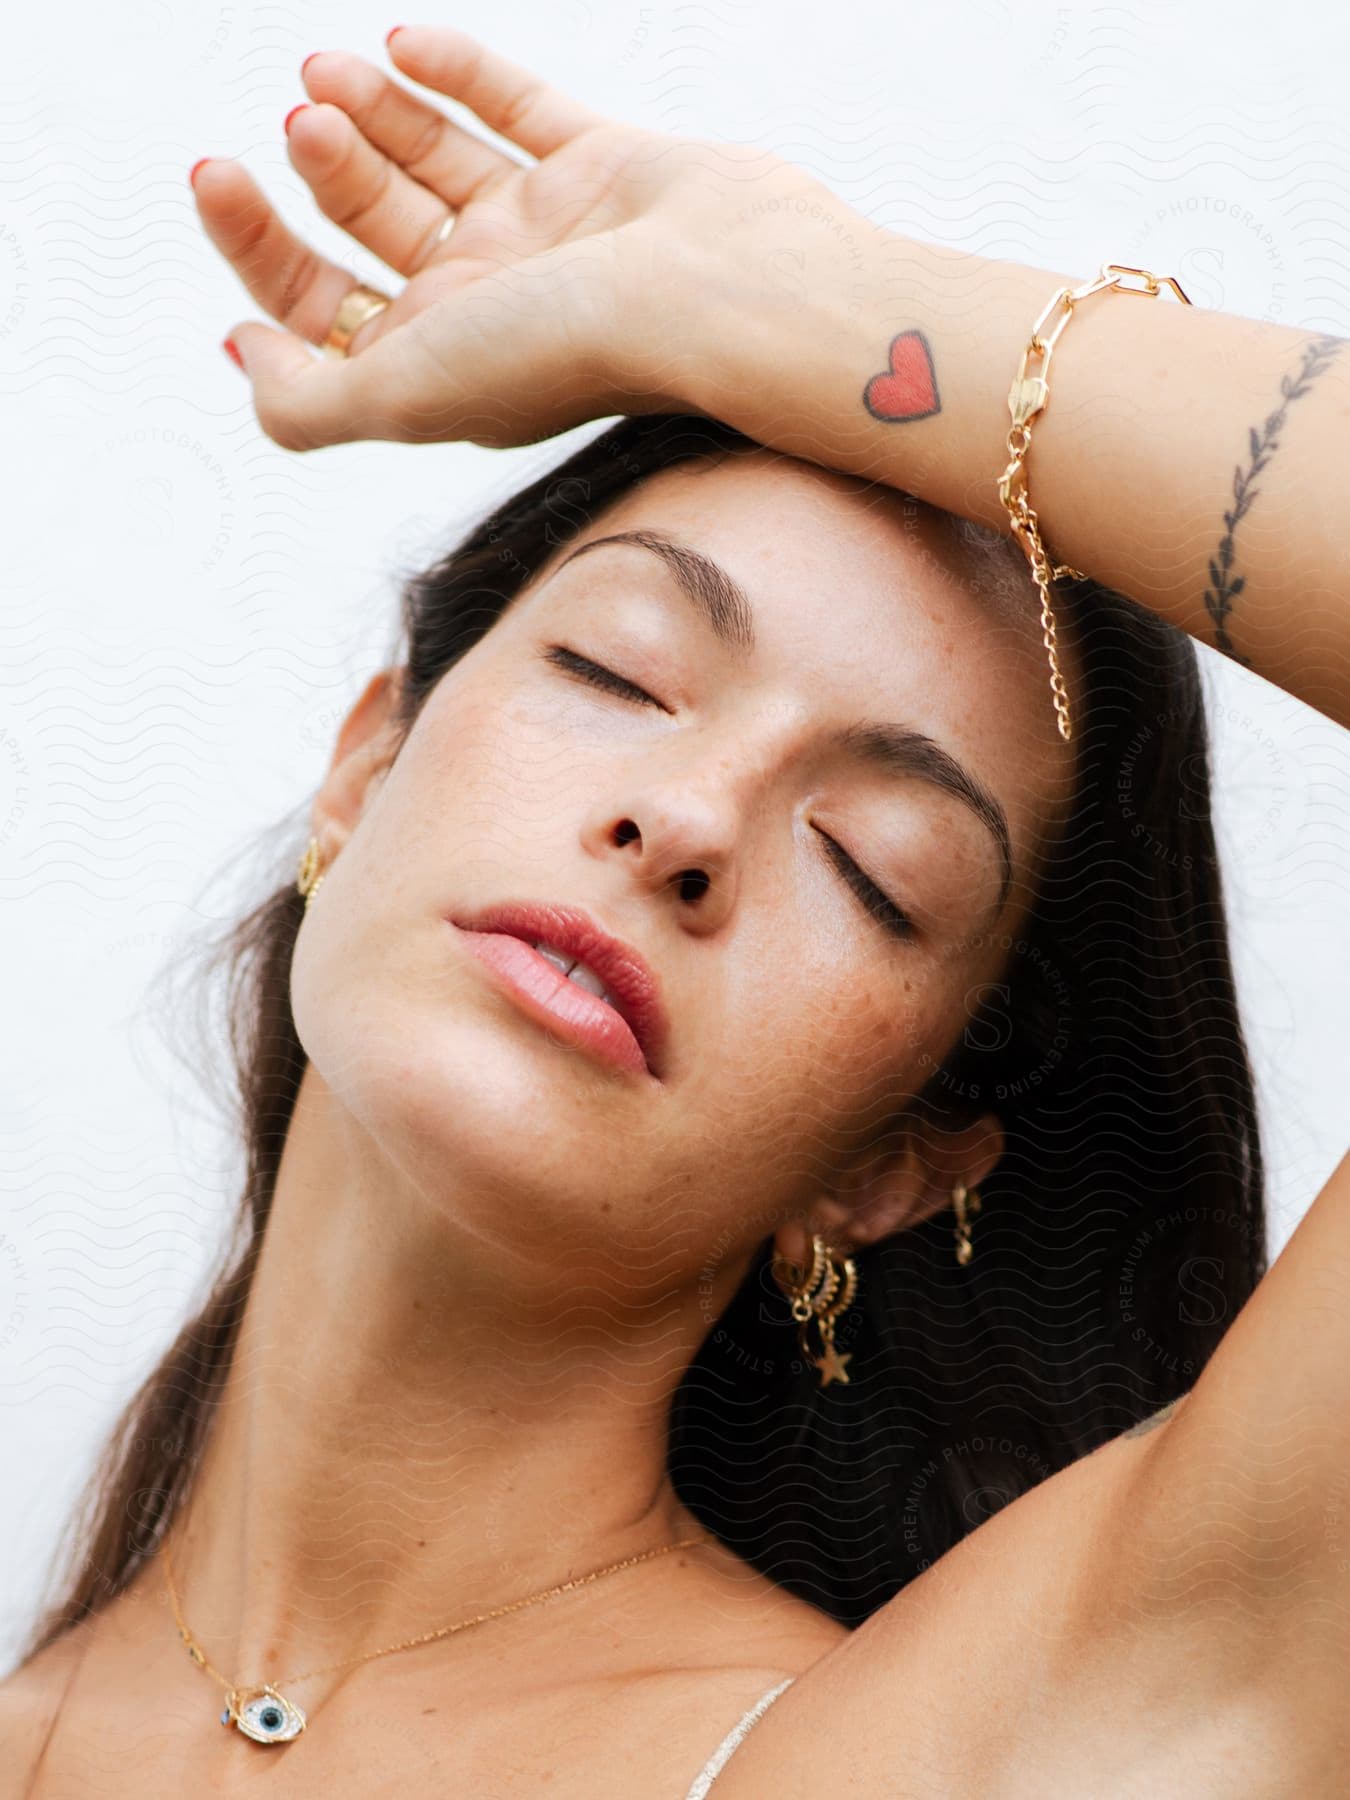 A woman models a bracelet and other jewelry with her arm up and resting on her forehead